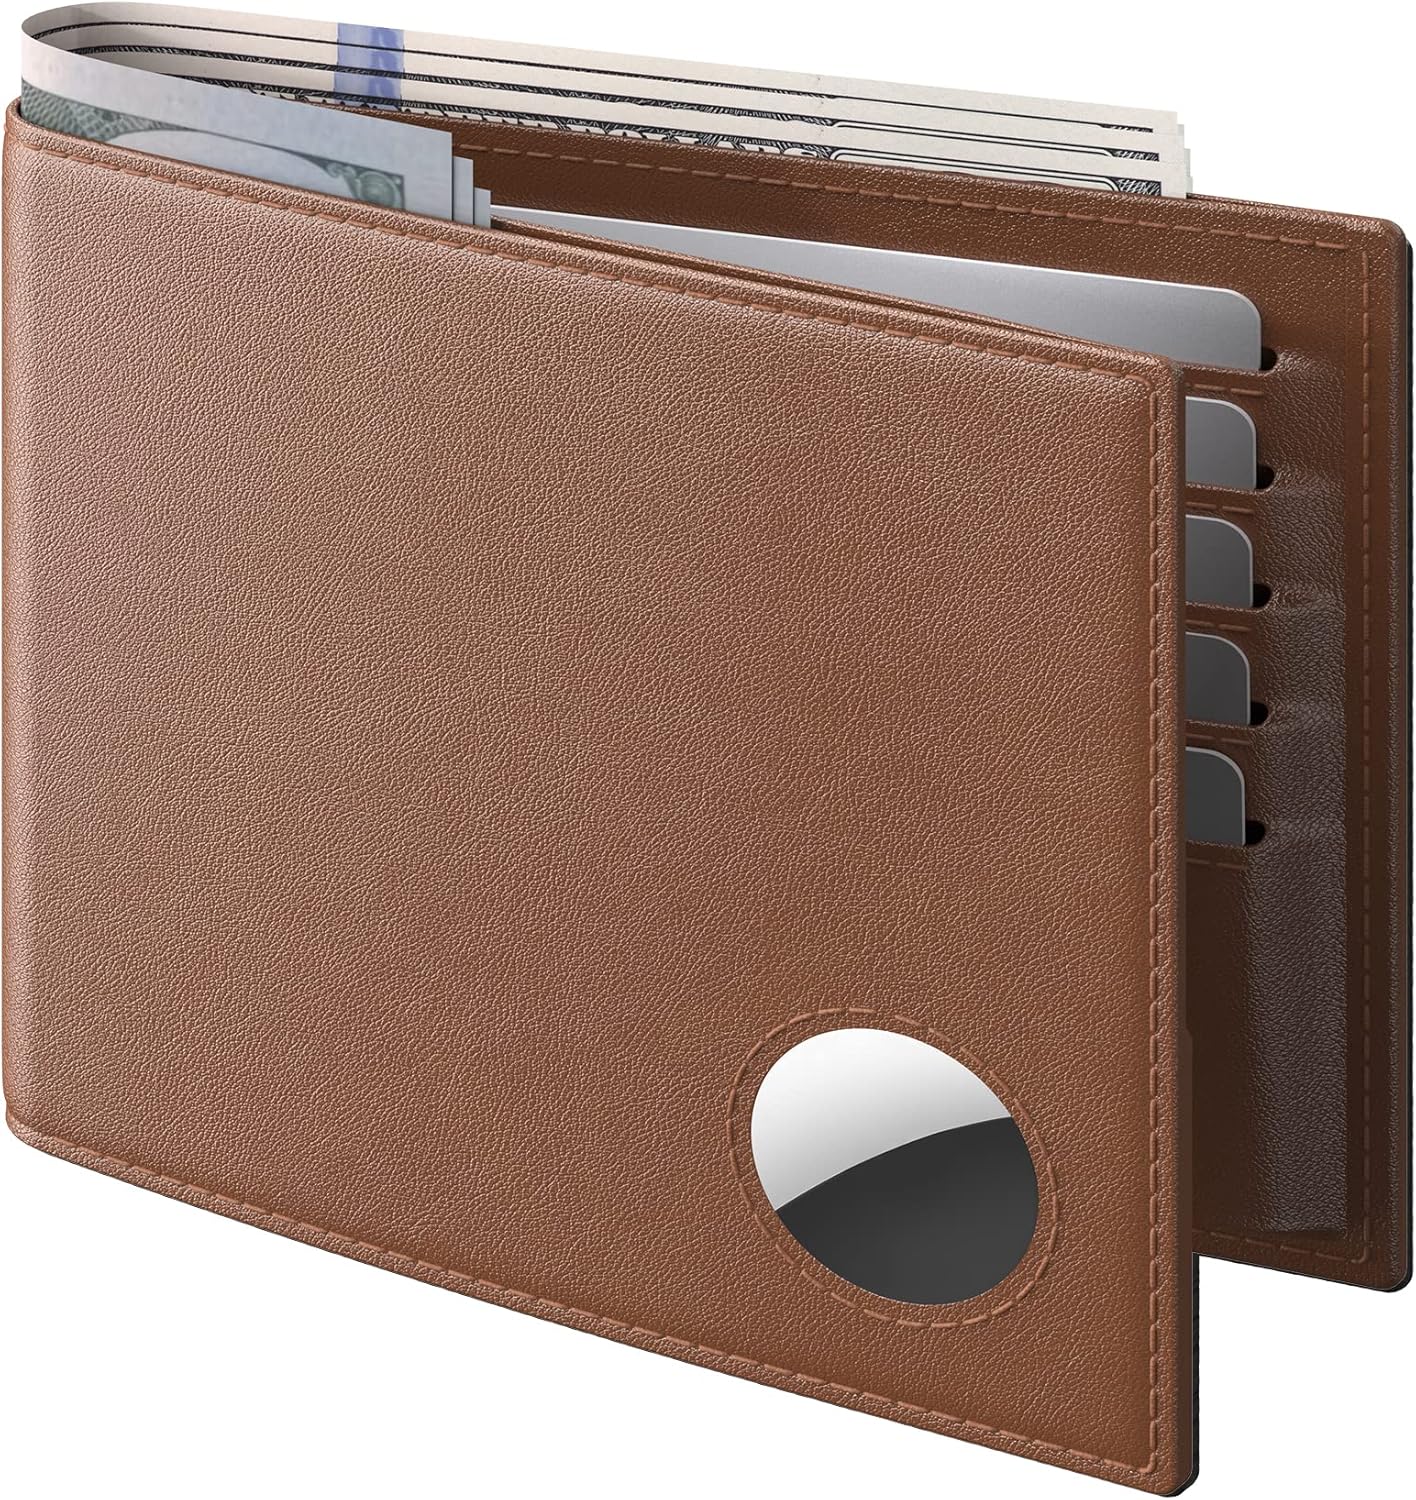 Men's Slim RFID Leather Wallet with AirTag Holder - Top Grain Bifold - Abbycart